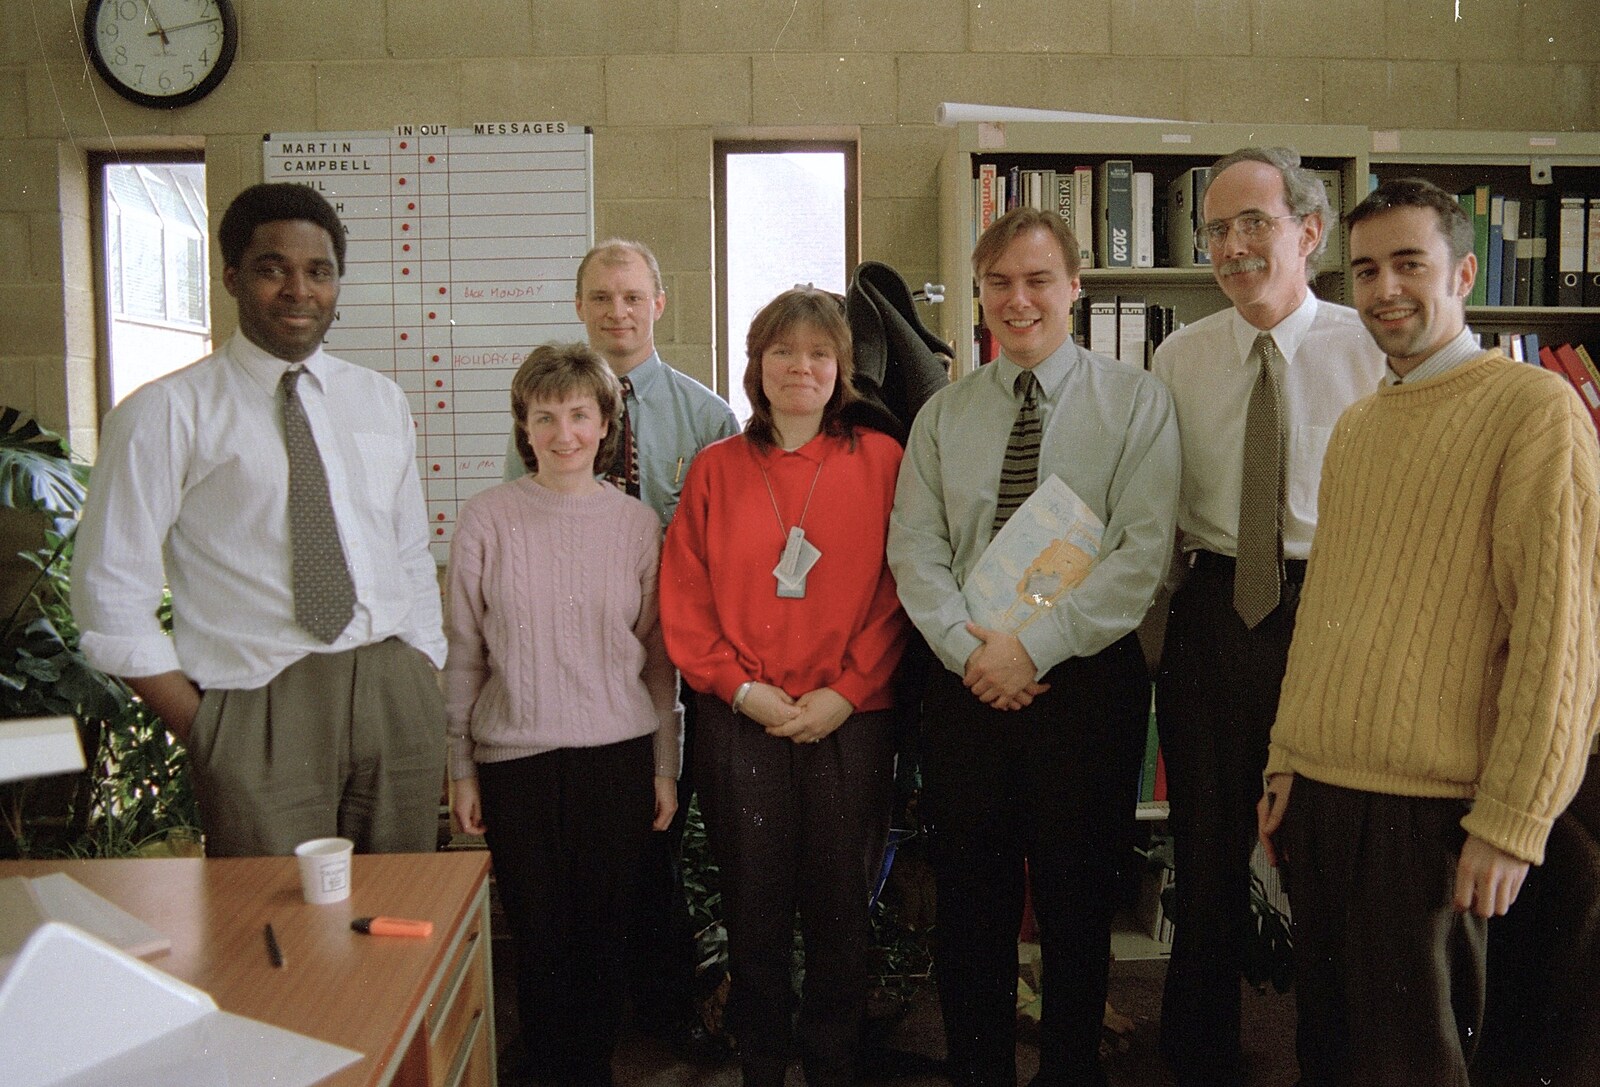 Carl, Alan, Sheila, Campbell, Martin and Trevor from Campbell Leaves CISU, Suffolk County Council, Ipswich, Suffolk - 4th May 1996